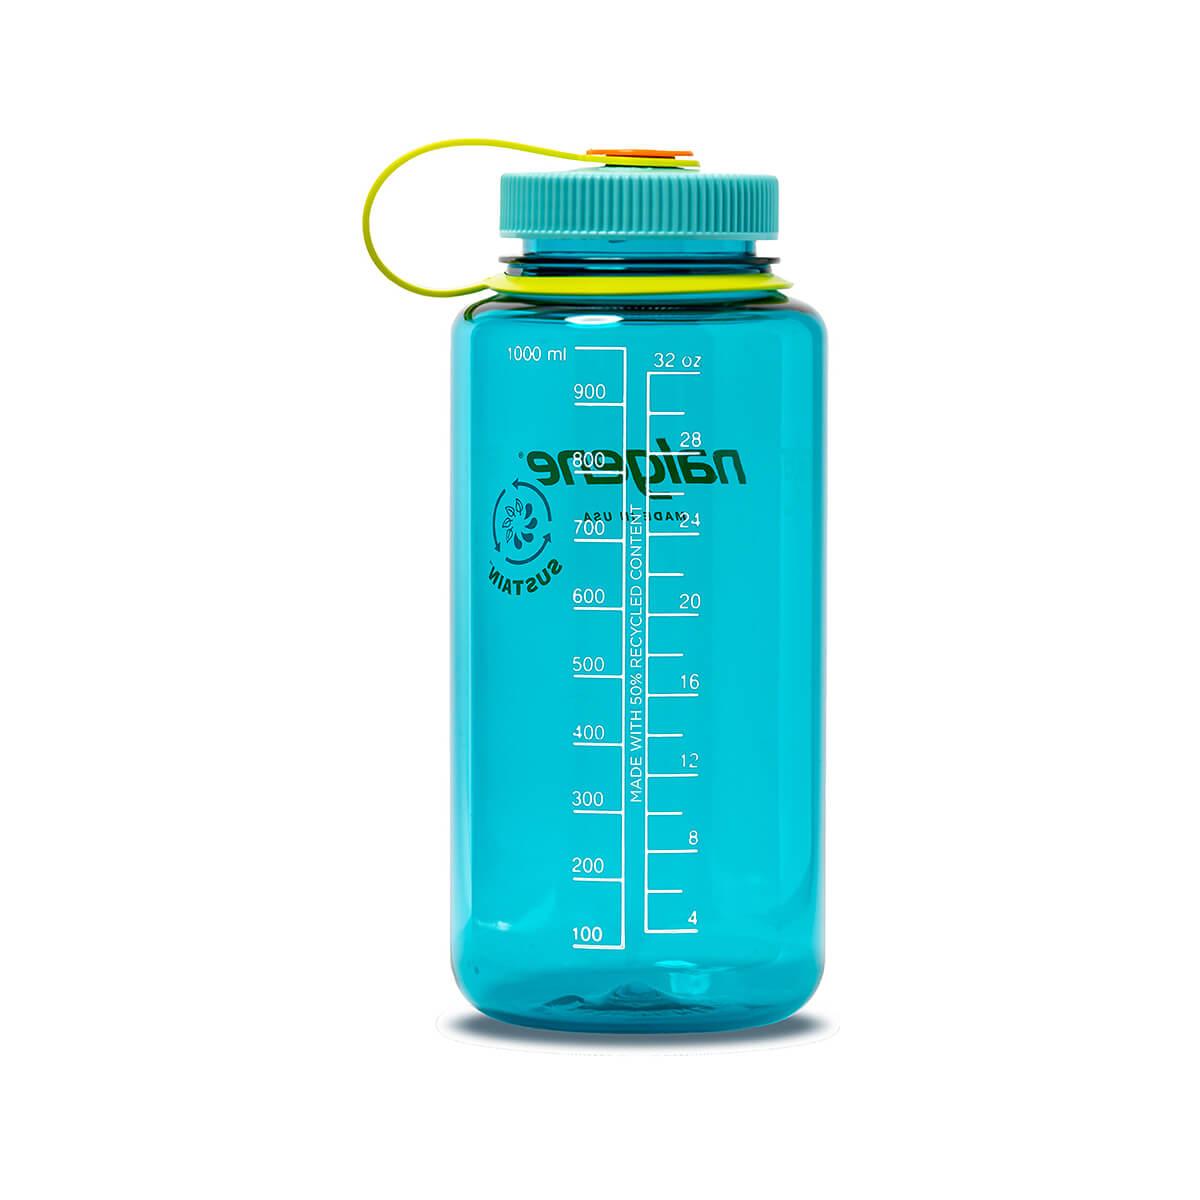 1L Narrow Mouth Sustain TEAL, Buy 1L Narrow Mouth Sustain TEAL here